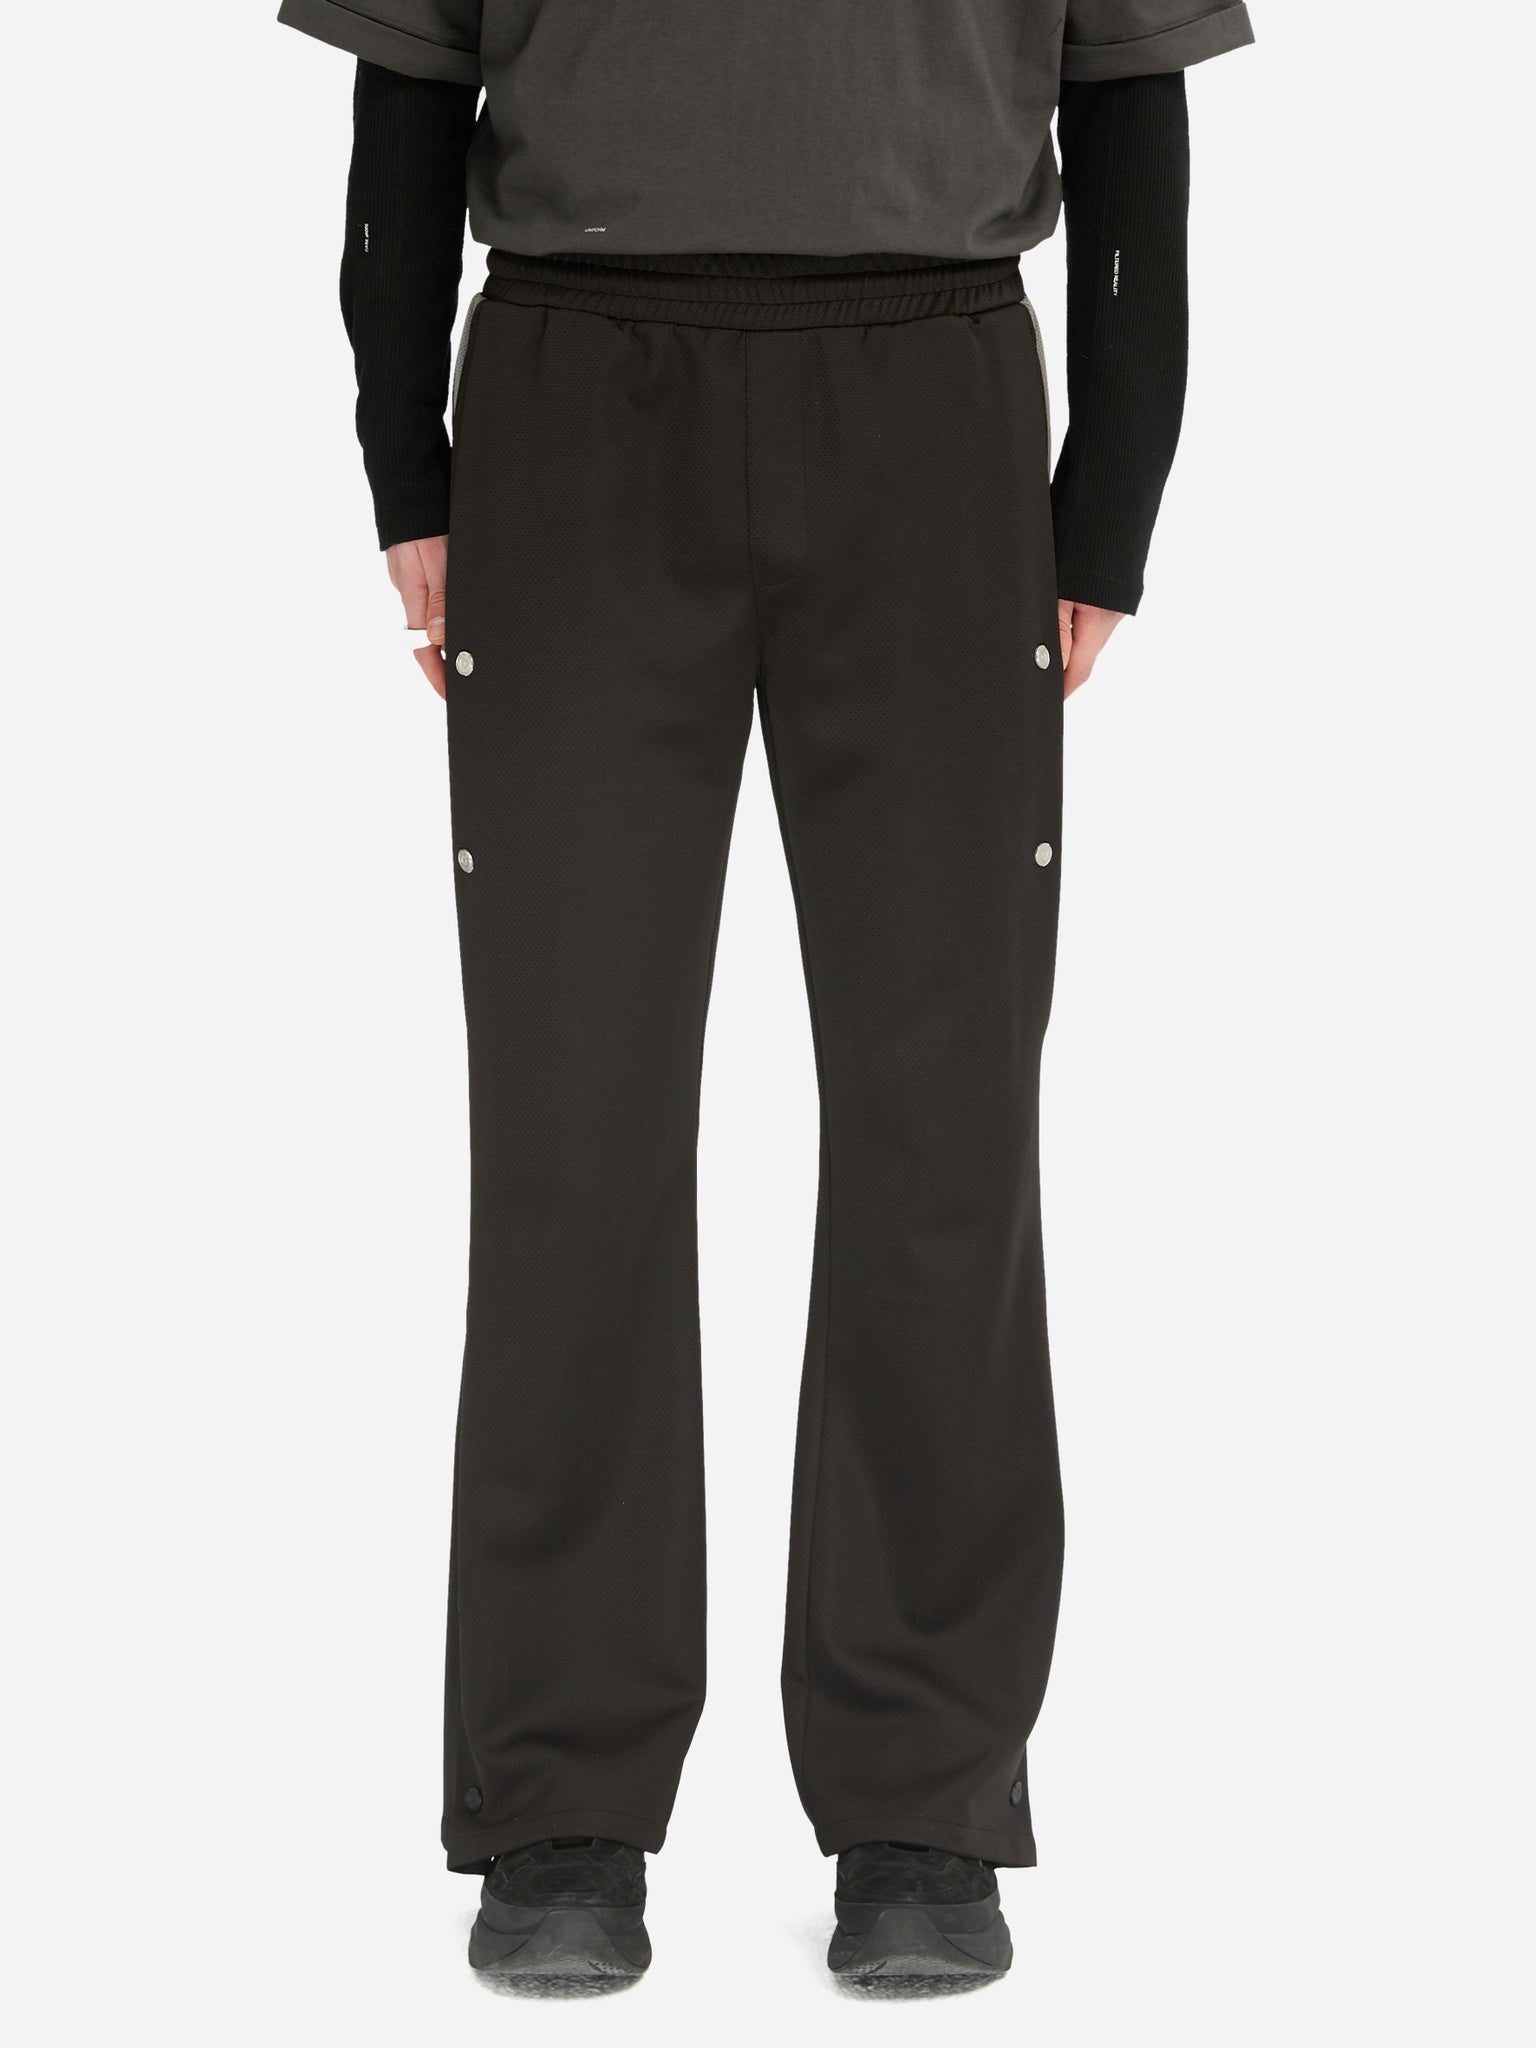 Van Heusen Innerwear Track Pants, Men Blue Solid Active Wear Track Pants  for Athleisure at Vanheusenindia.abfrl.in